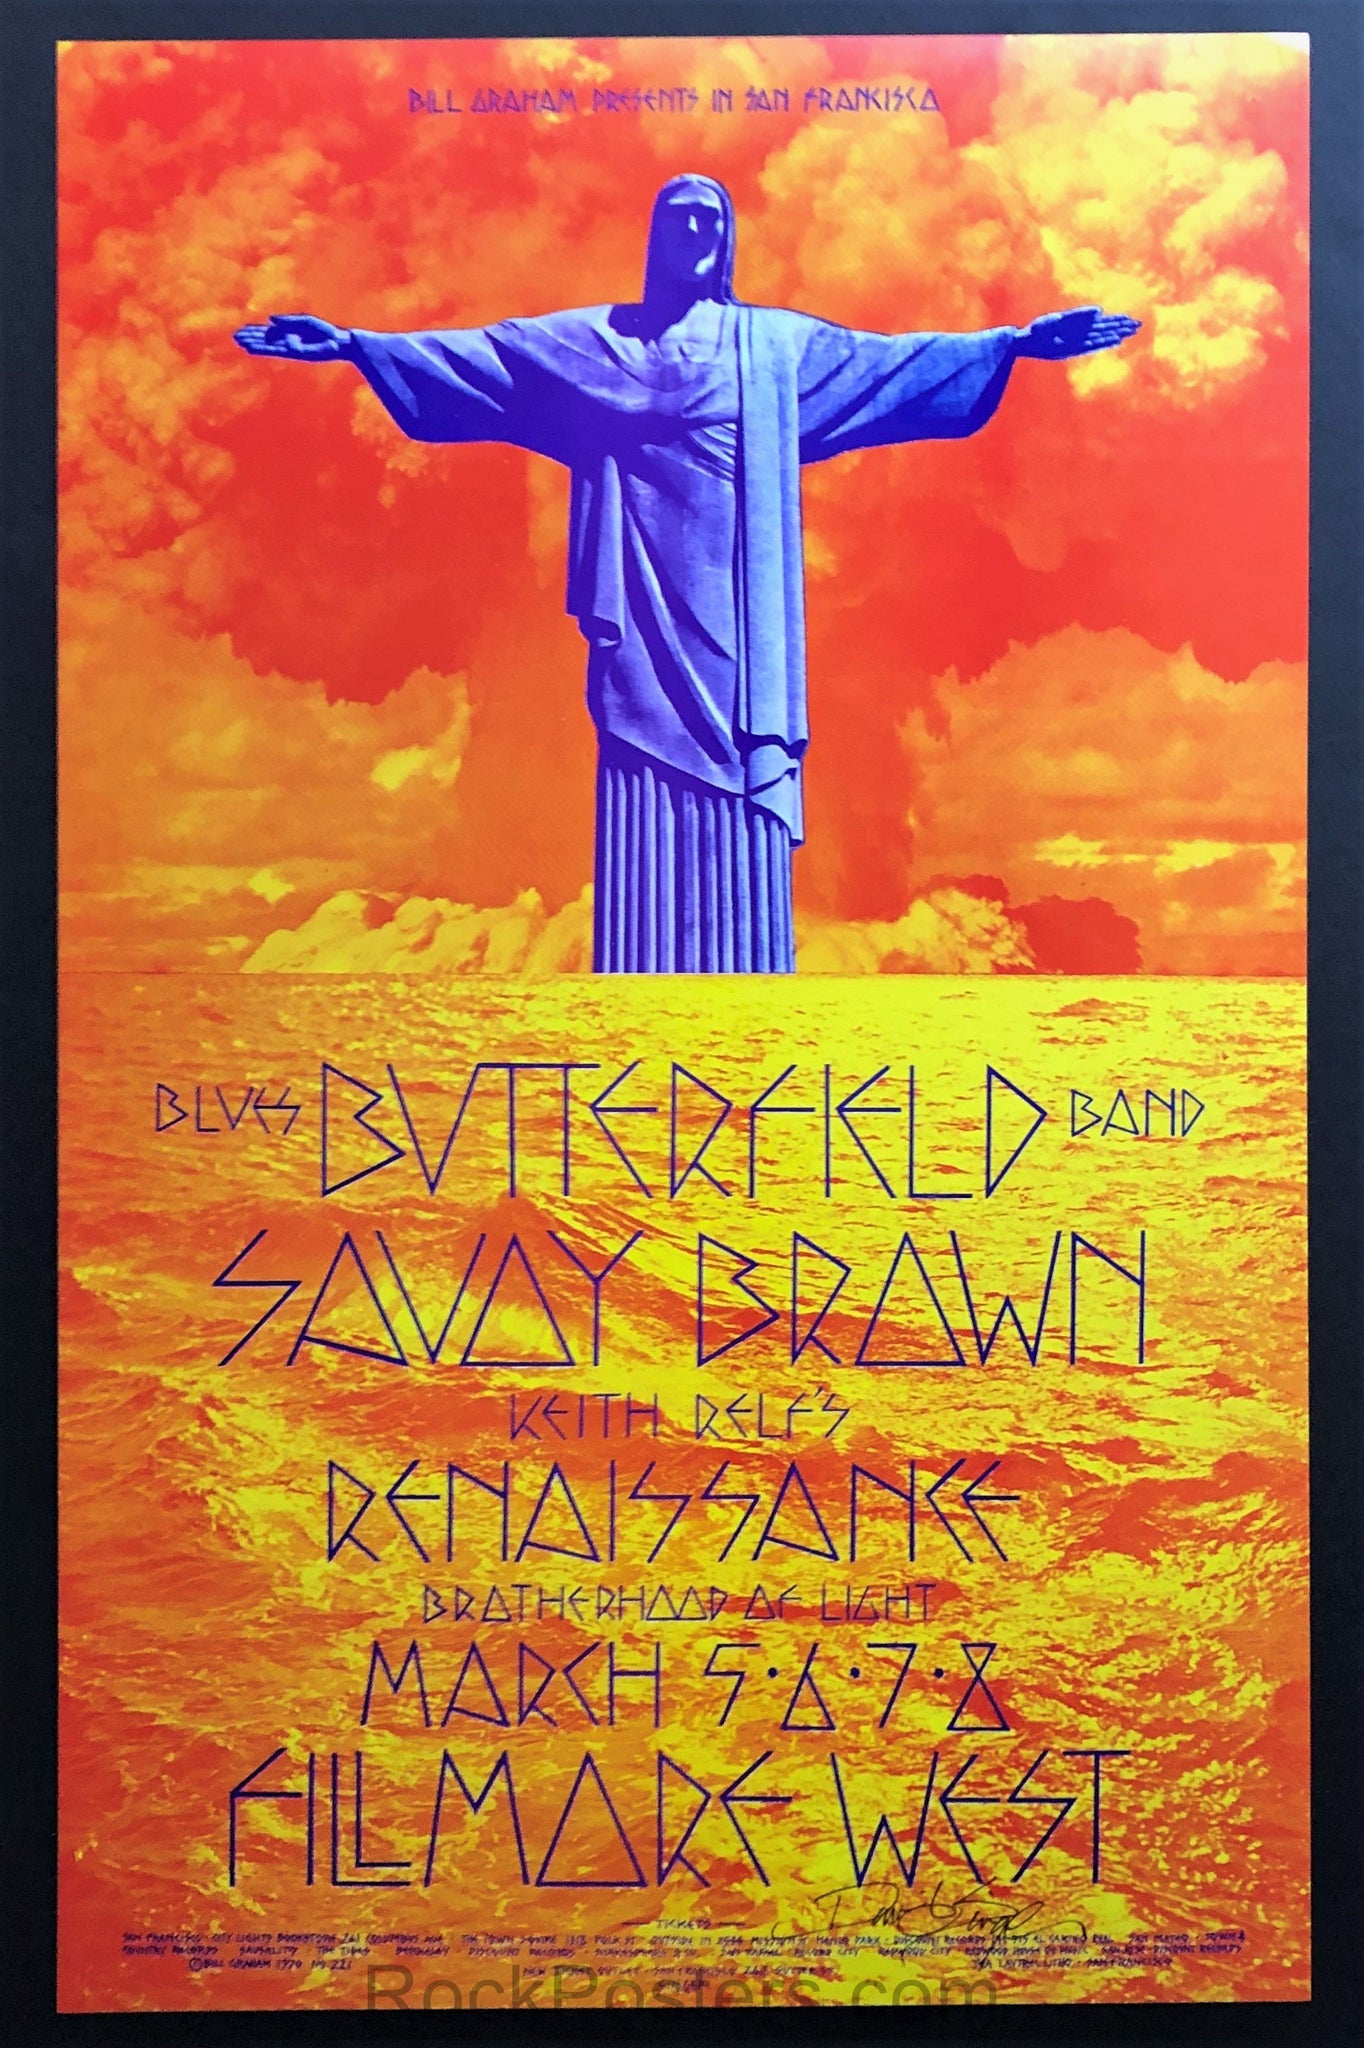 AUCTION - BG-221 - Butterfield Blues Band - 1970 Poster - David Singer Signed - Fillmore West - Mint